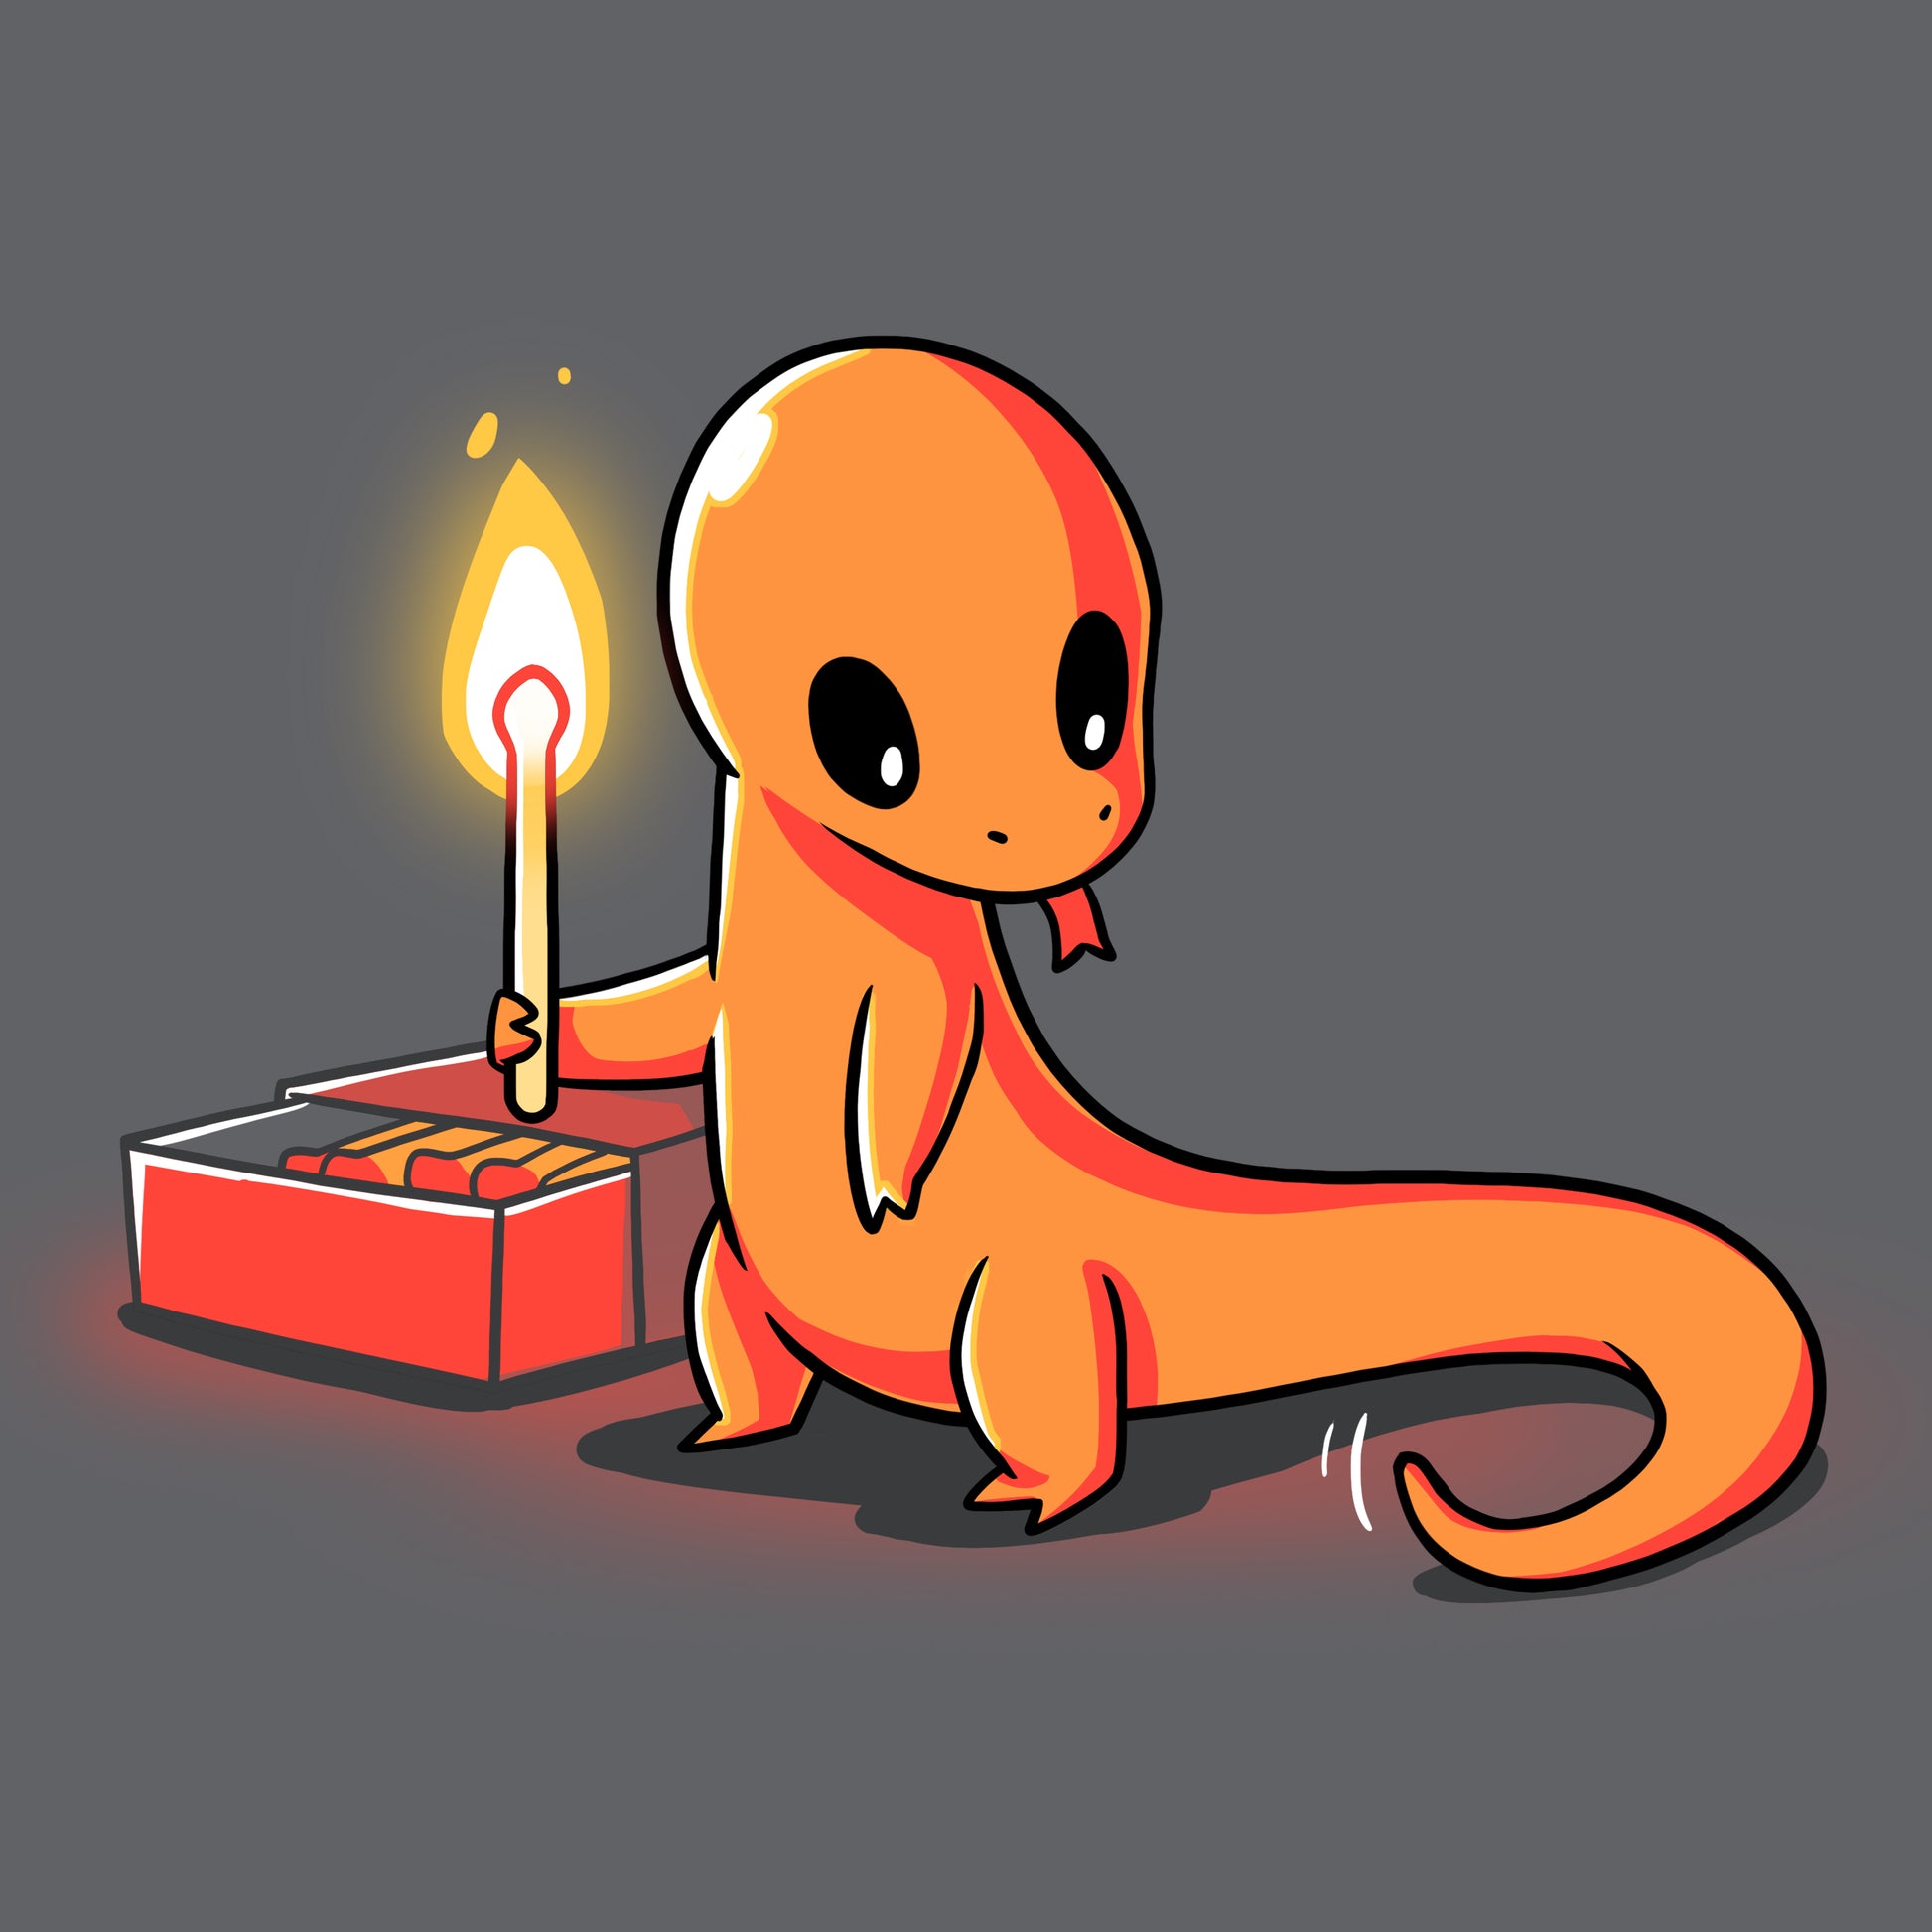 A TeeTurtle original design depicting the Playing With Fire, a small orange lizard holding a candle.